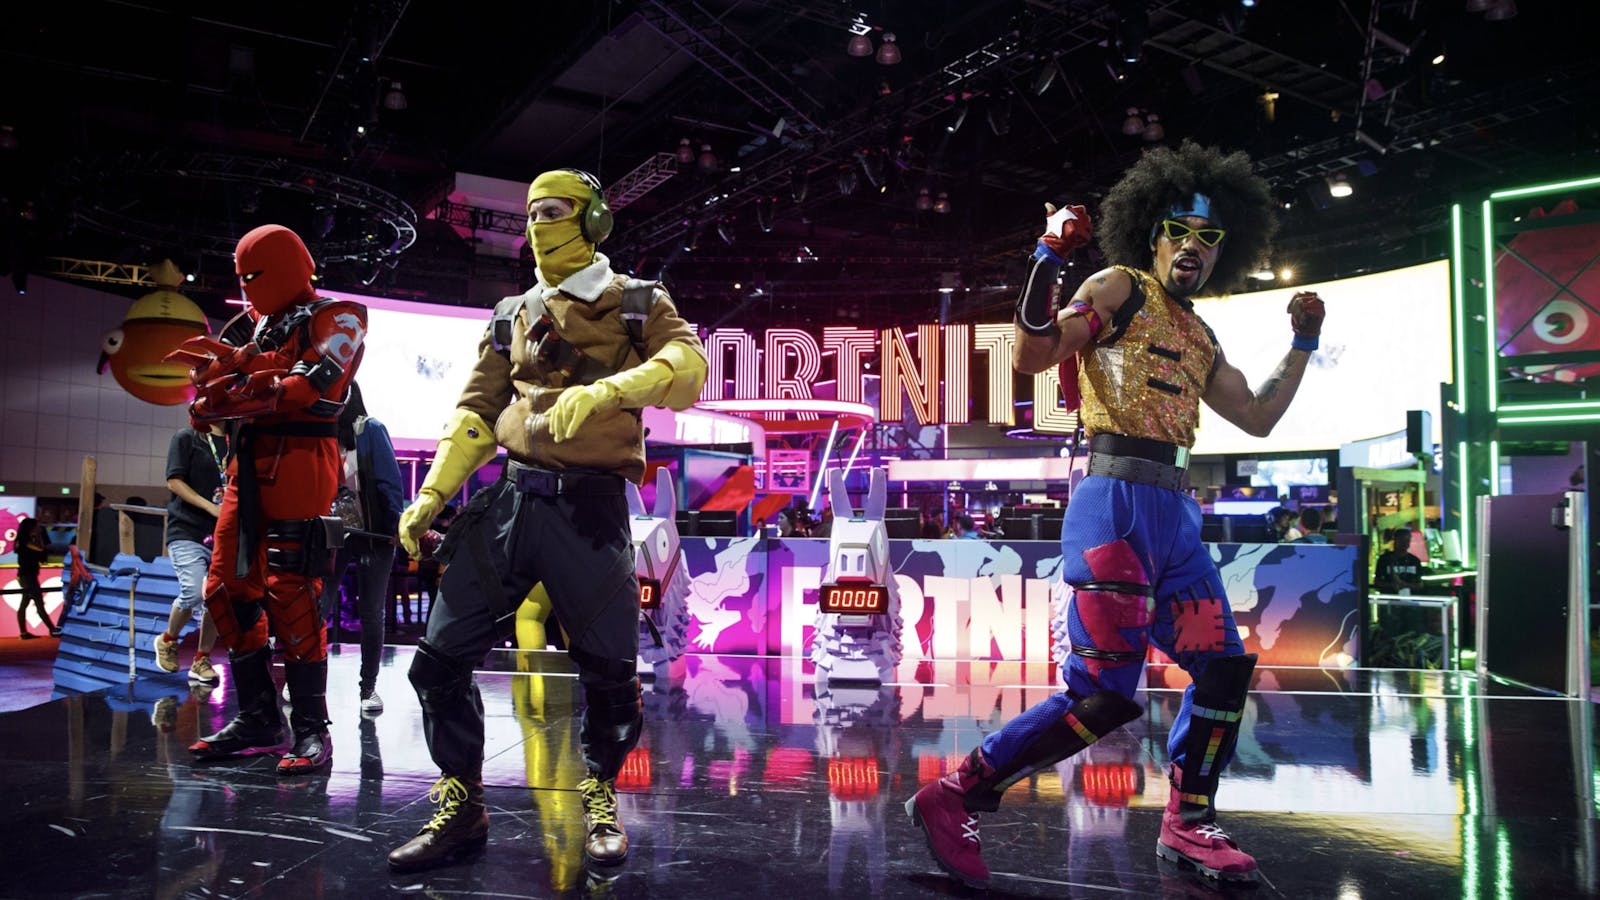 Character actors from Fortnite  dance during the E3 Electronic Entertainment Expo in Los Angeles in 2019. Photo by Bloomberg.